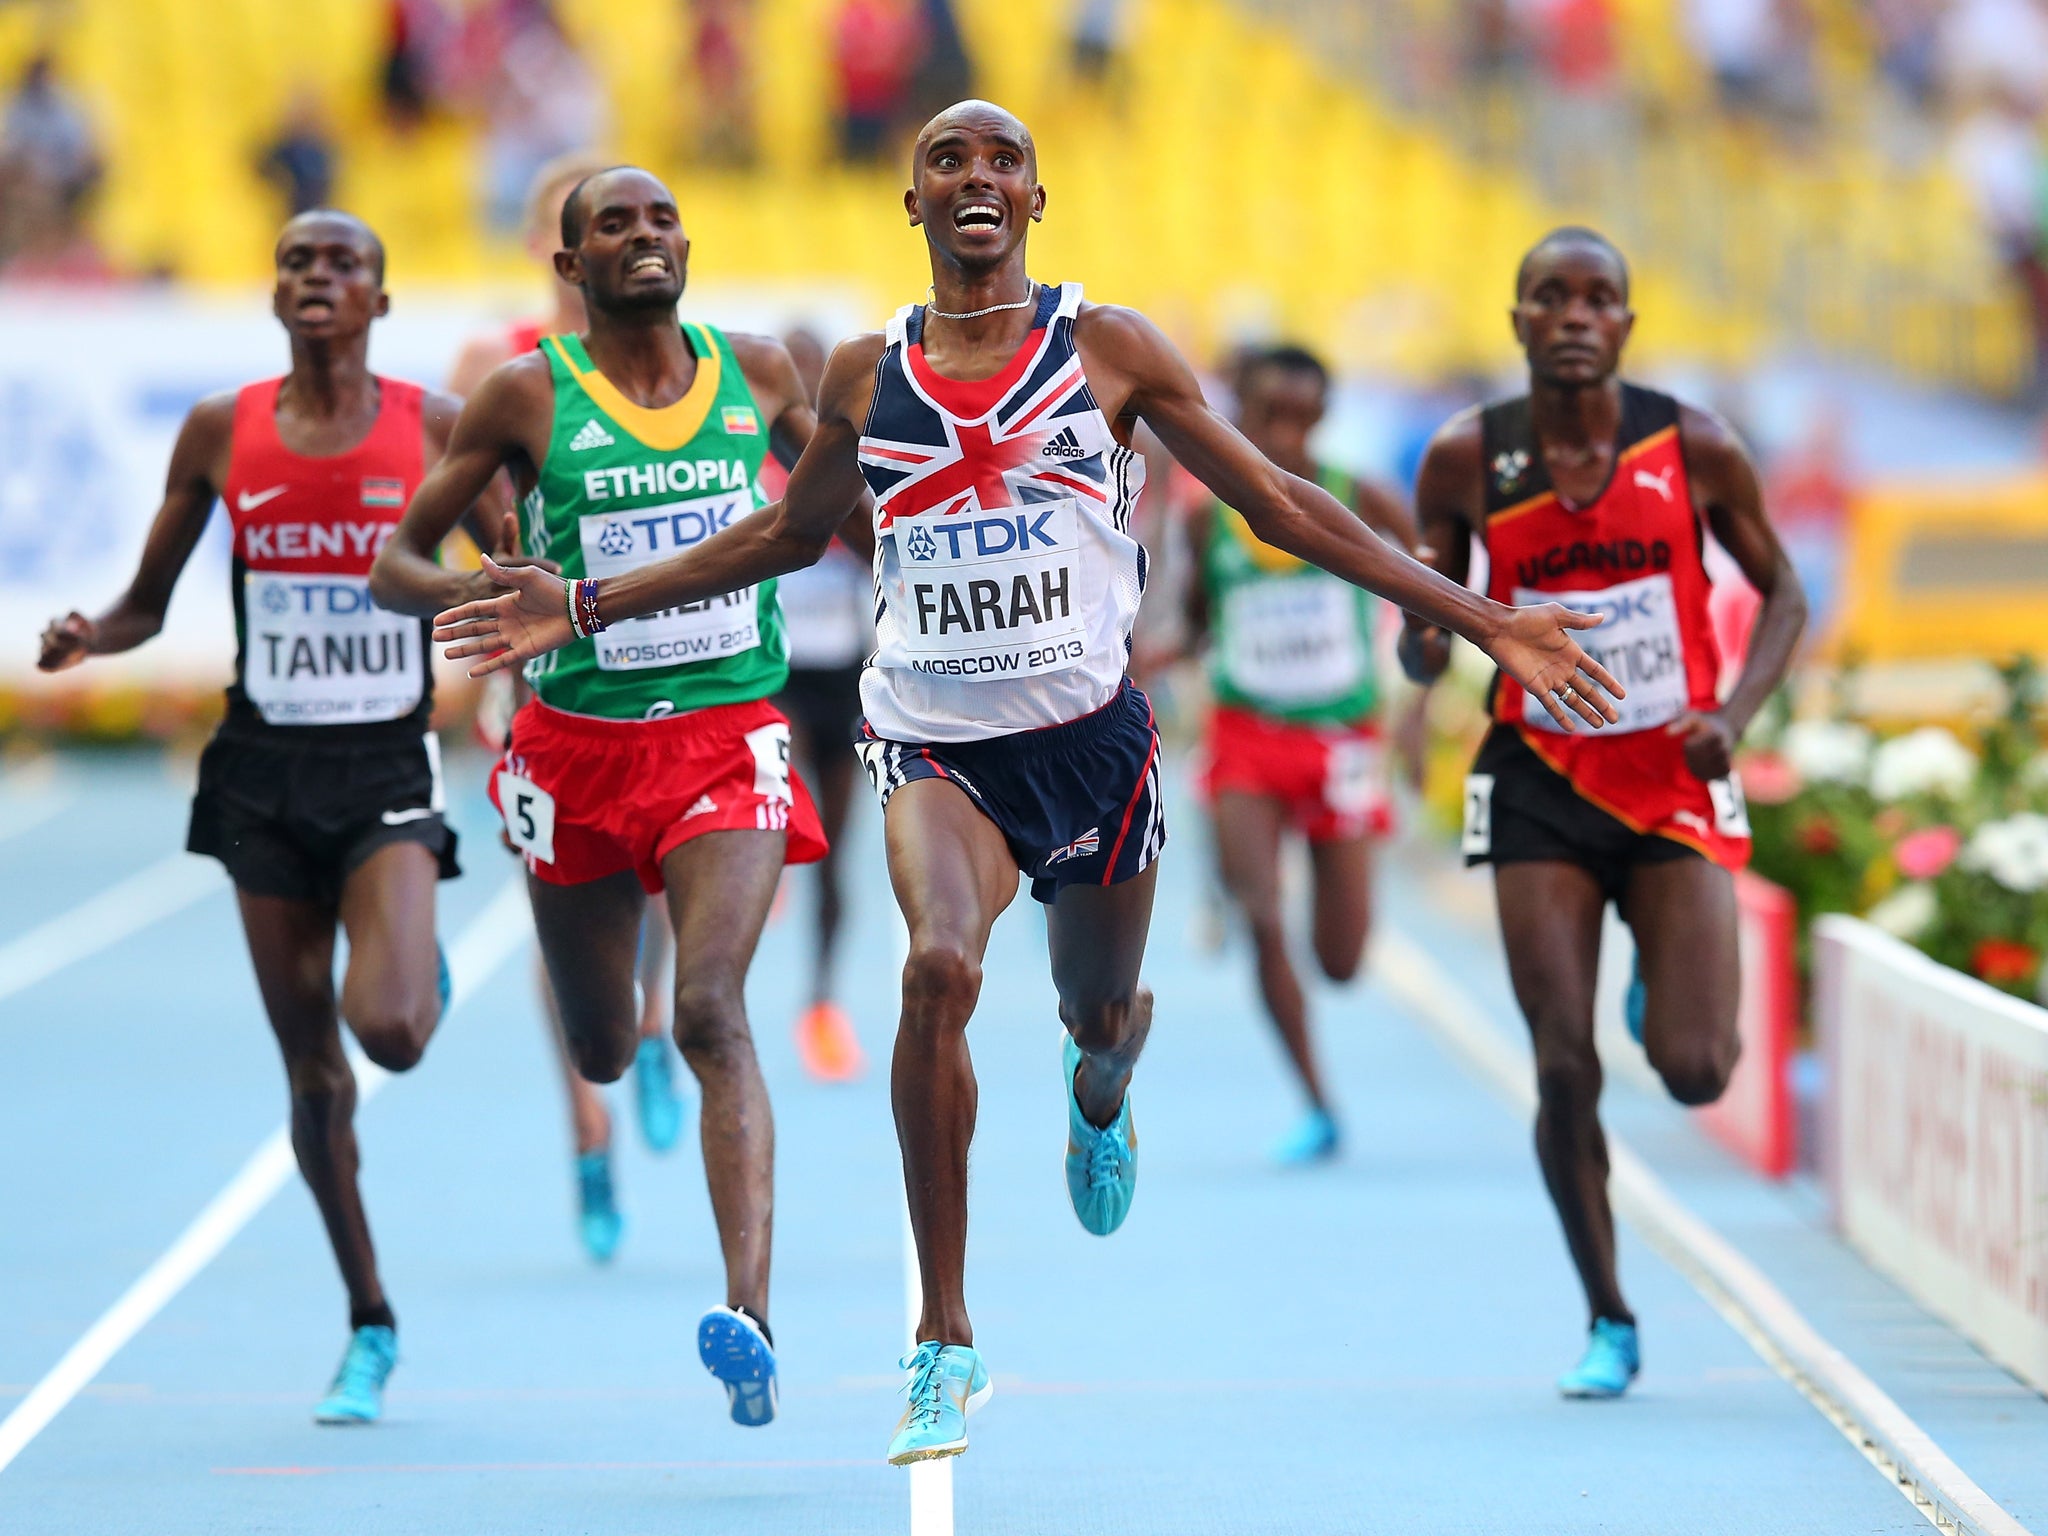 Mo Farah takes Gold in the 10,000m at the World Athletics Championship in Moscow